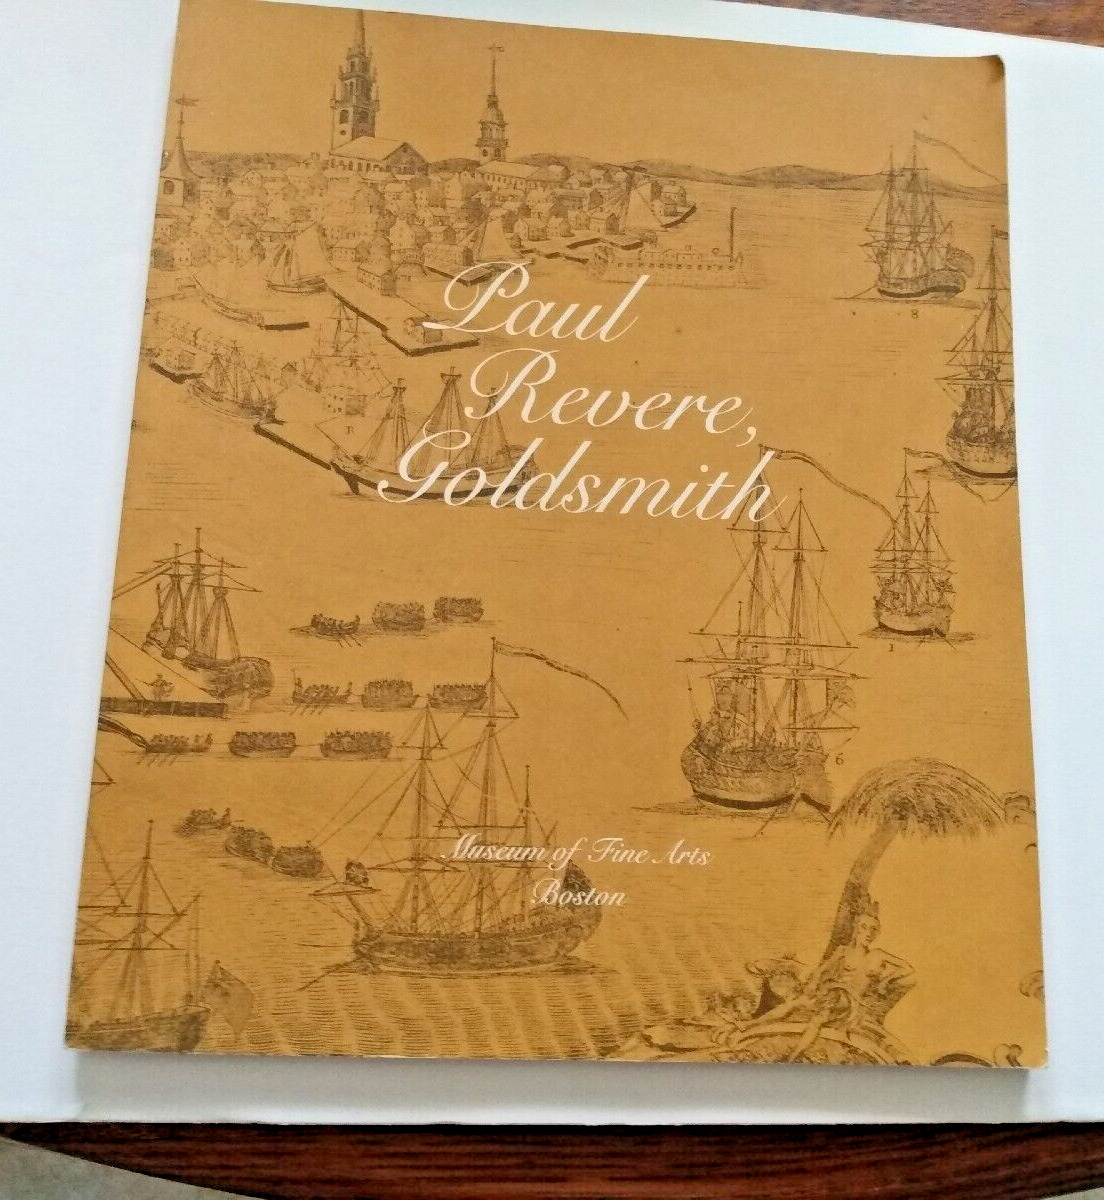 Vintage PAUL REVERE GOLDSMITH Book, Kathryn G. Buhler, Photos, Marks, 64 Pages